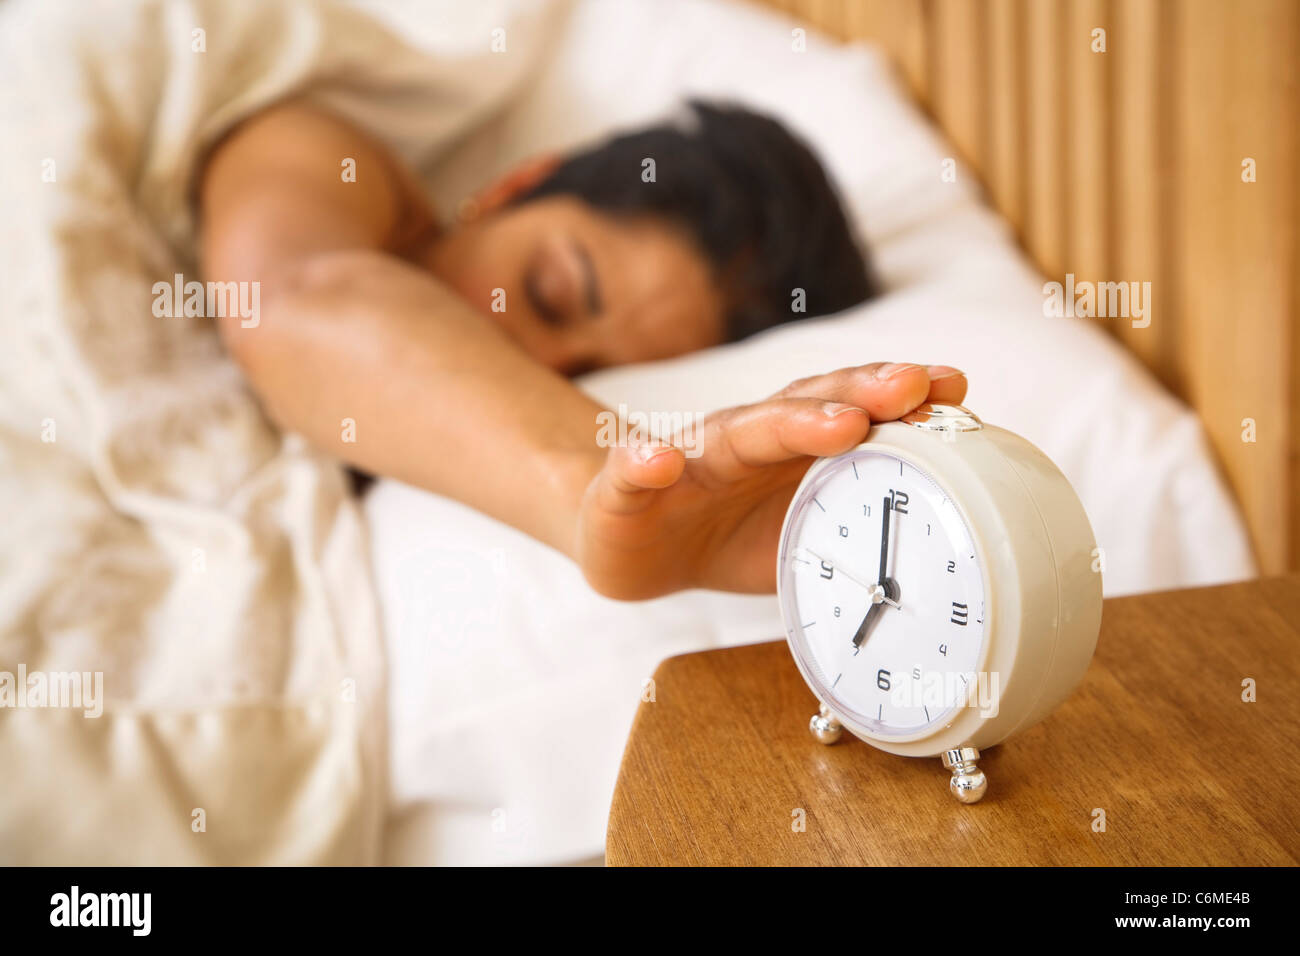 An Indian Asian woman wakes up and reaches to turn off a traditional alarm clock Stock Photo